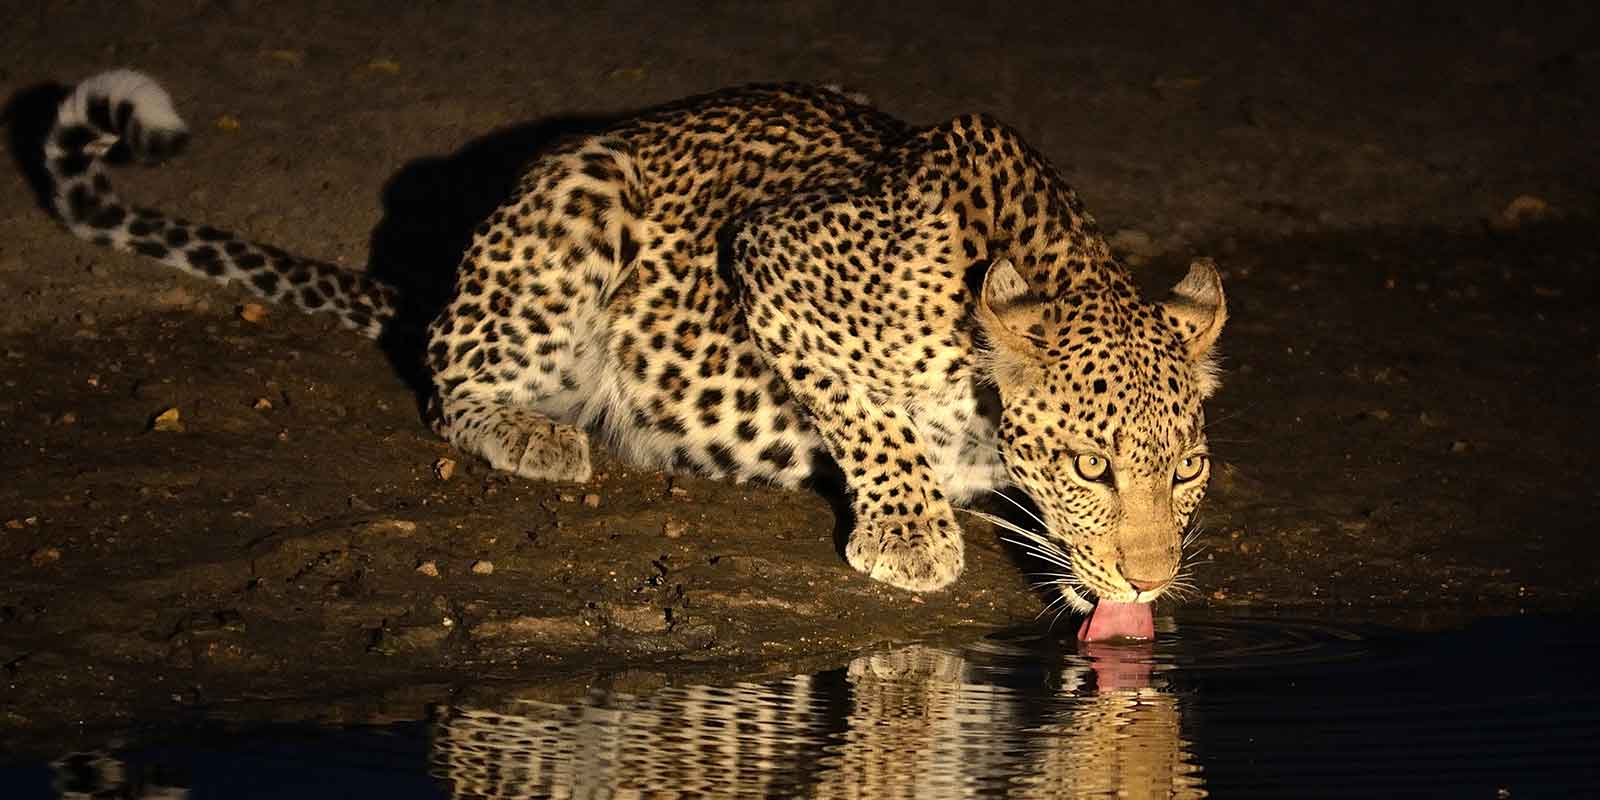 Leopard drinking from a waterhole at night in Africa